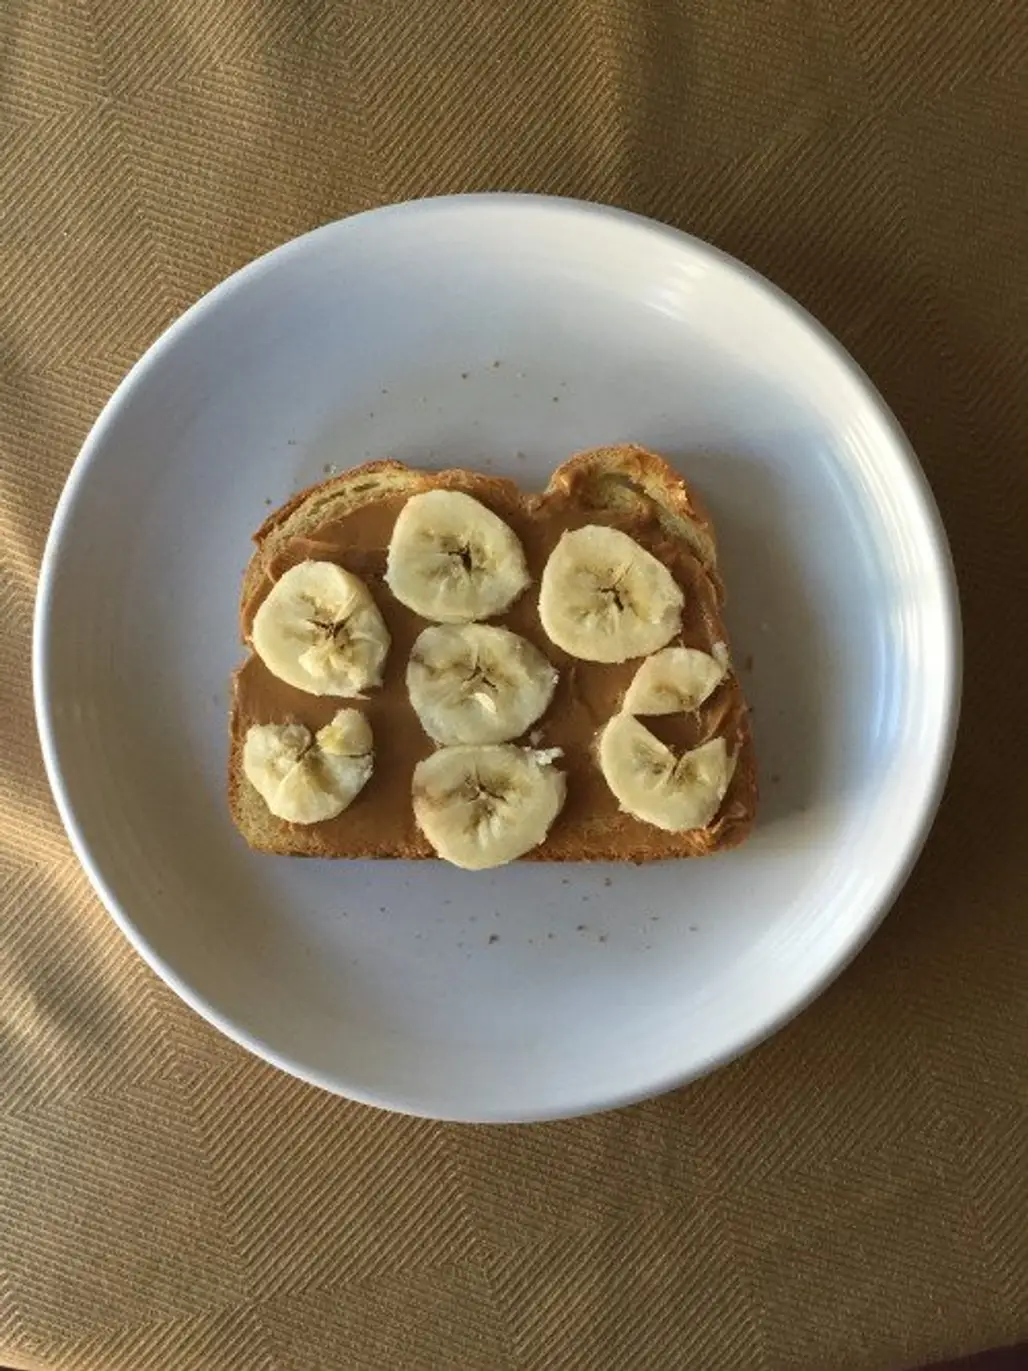 Go Fast with a Peanut Butter and Banana Sandwich